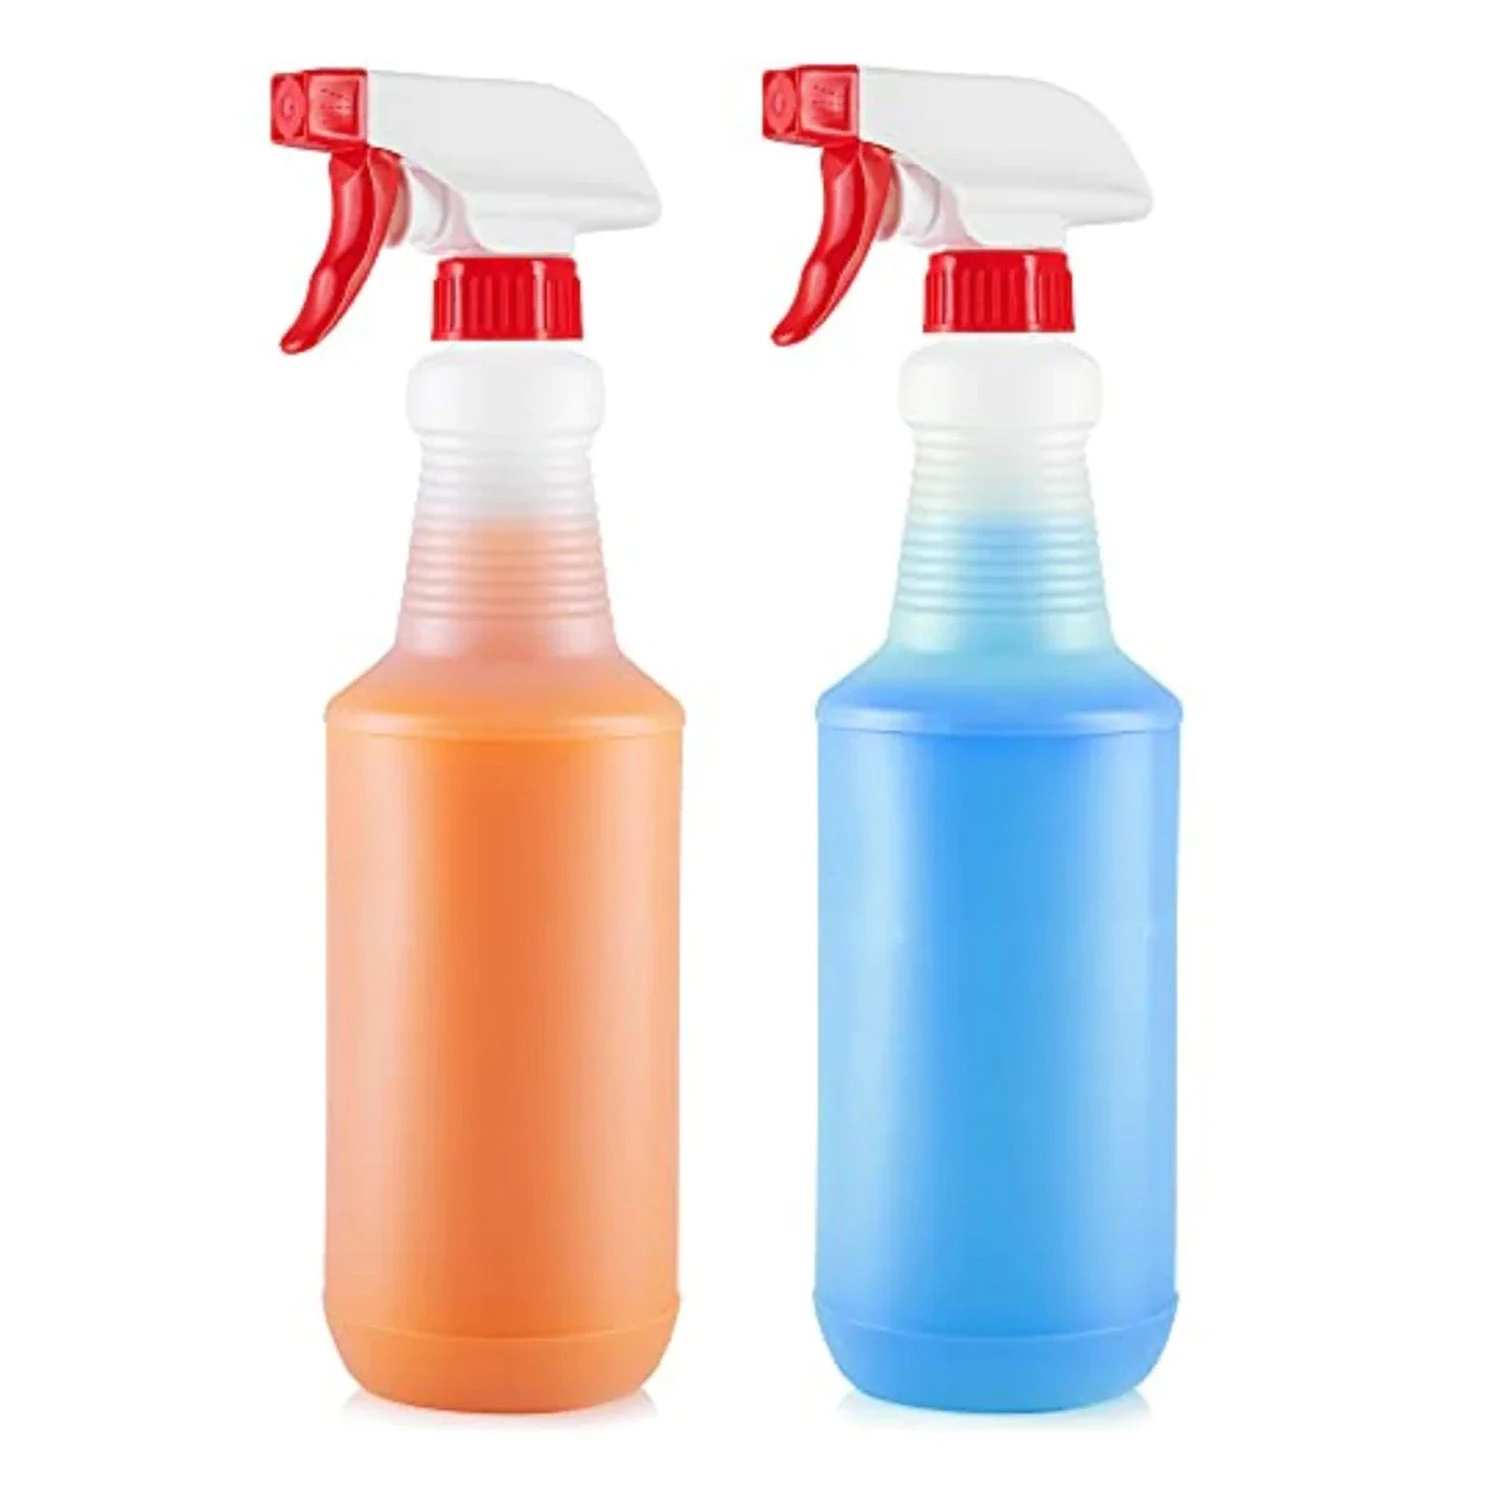 Zulay Home Plastic Spray Bottles With Adjustable Nozzle And Spring Loaded Trigger